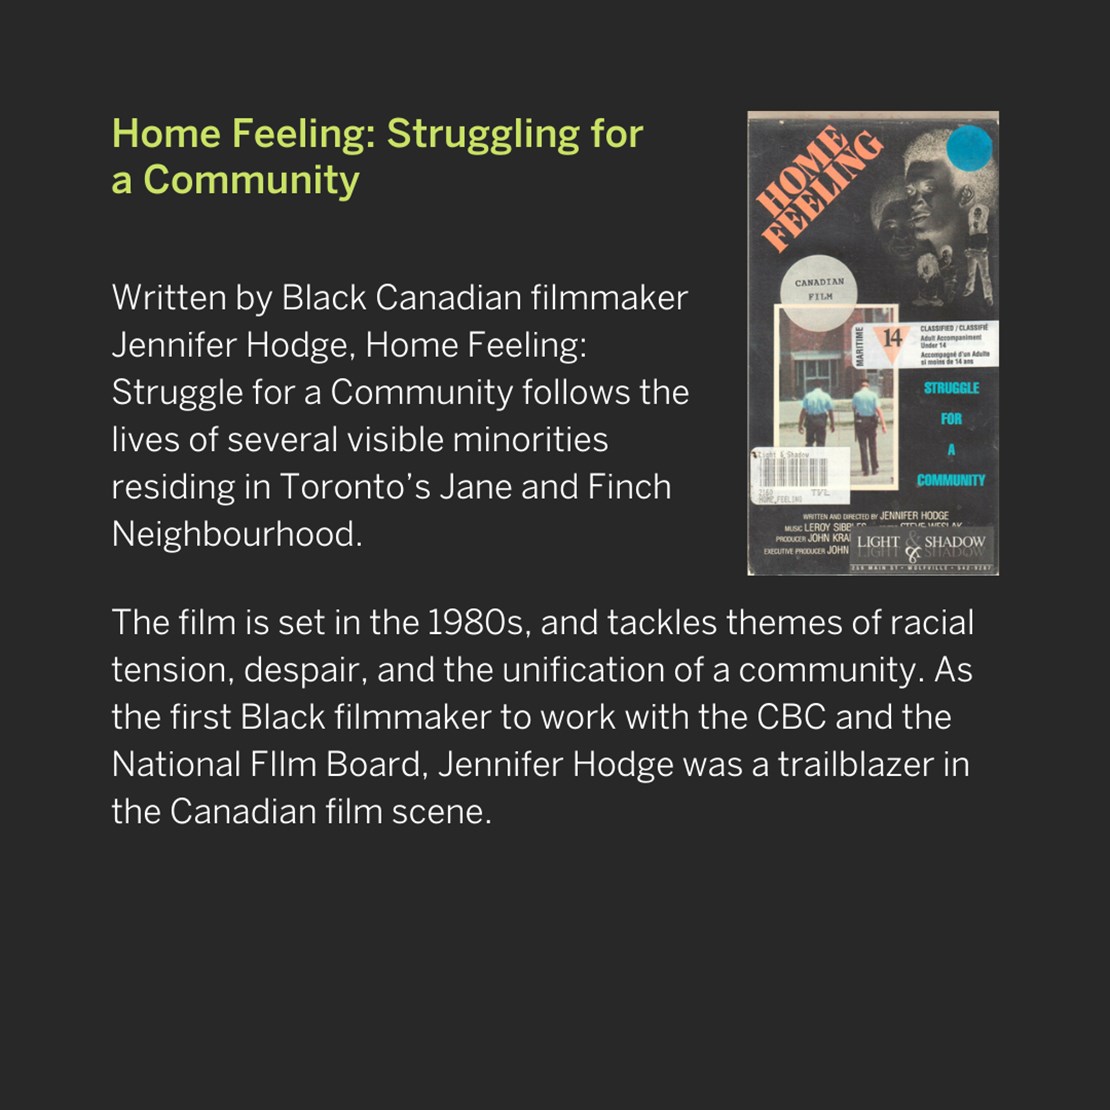 Home Feeling: Struggling for a Community